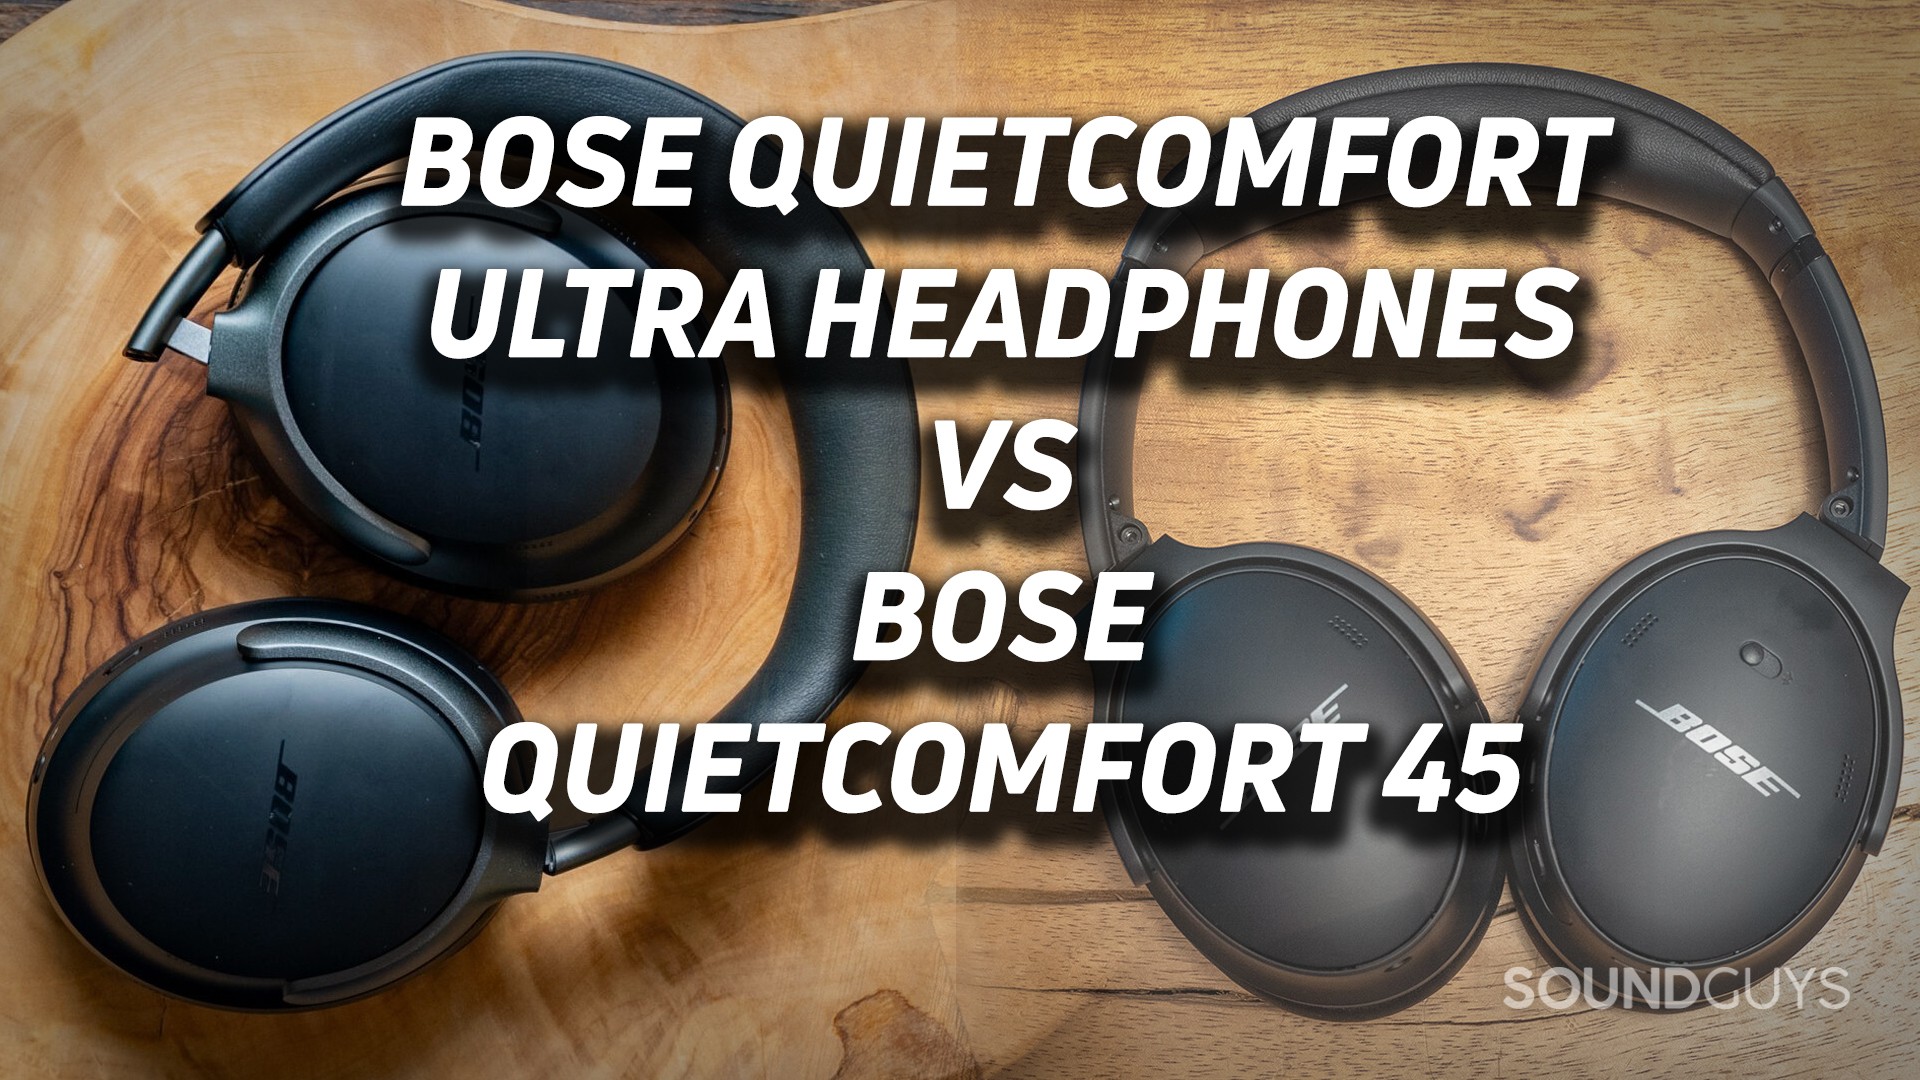 Two overlaid images show the Bose QuietComfort Ultra Headphones and the Bose QuietComfort 45 resting on a wood table with text.